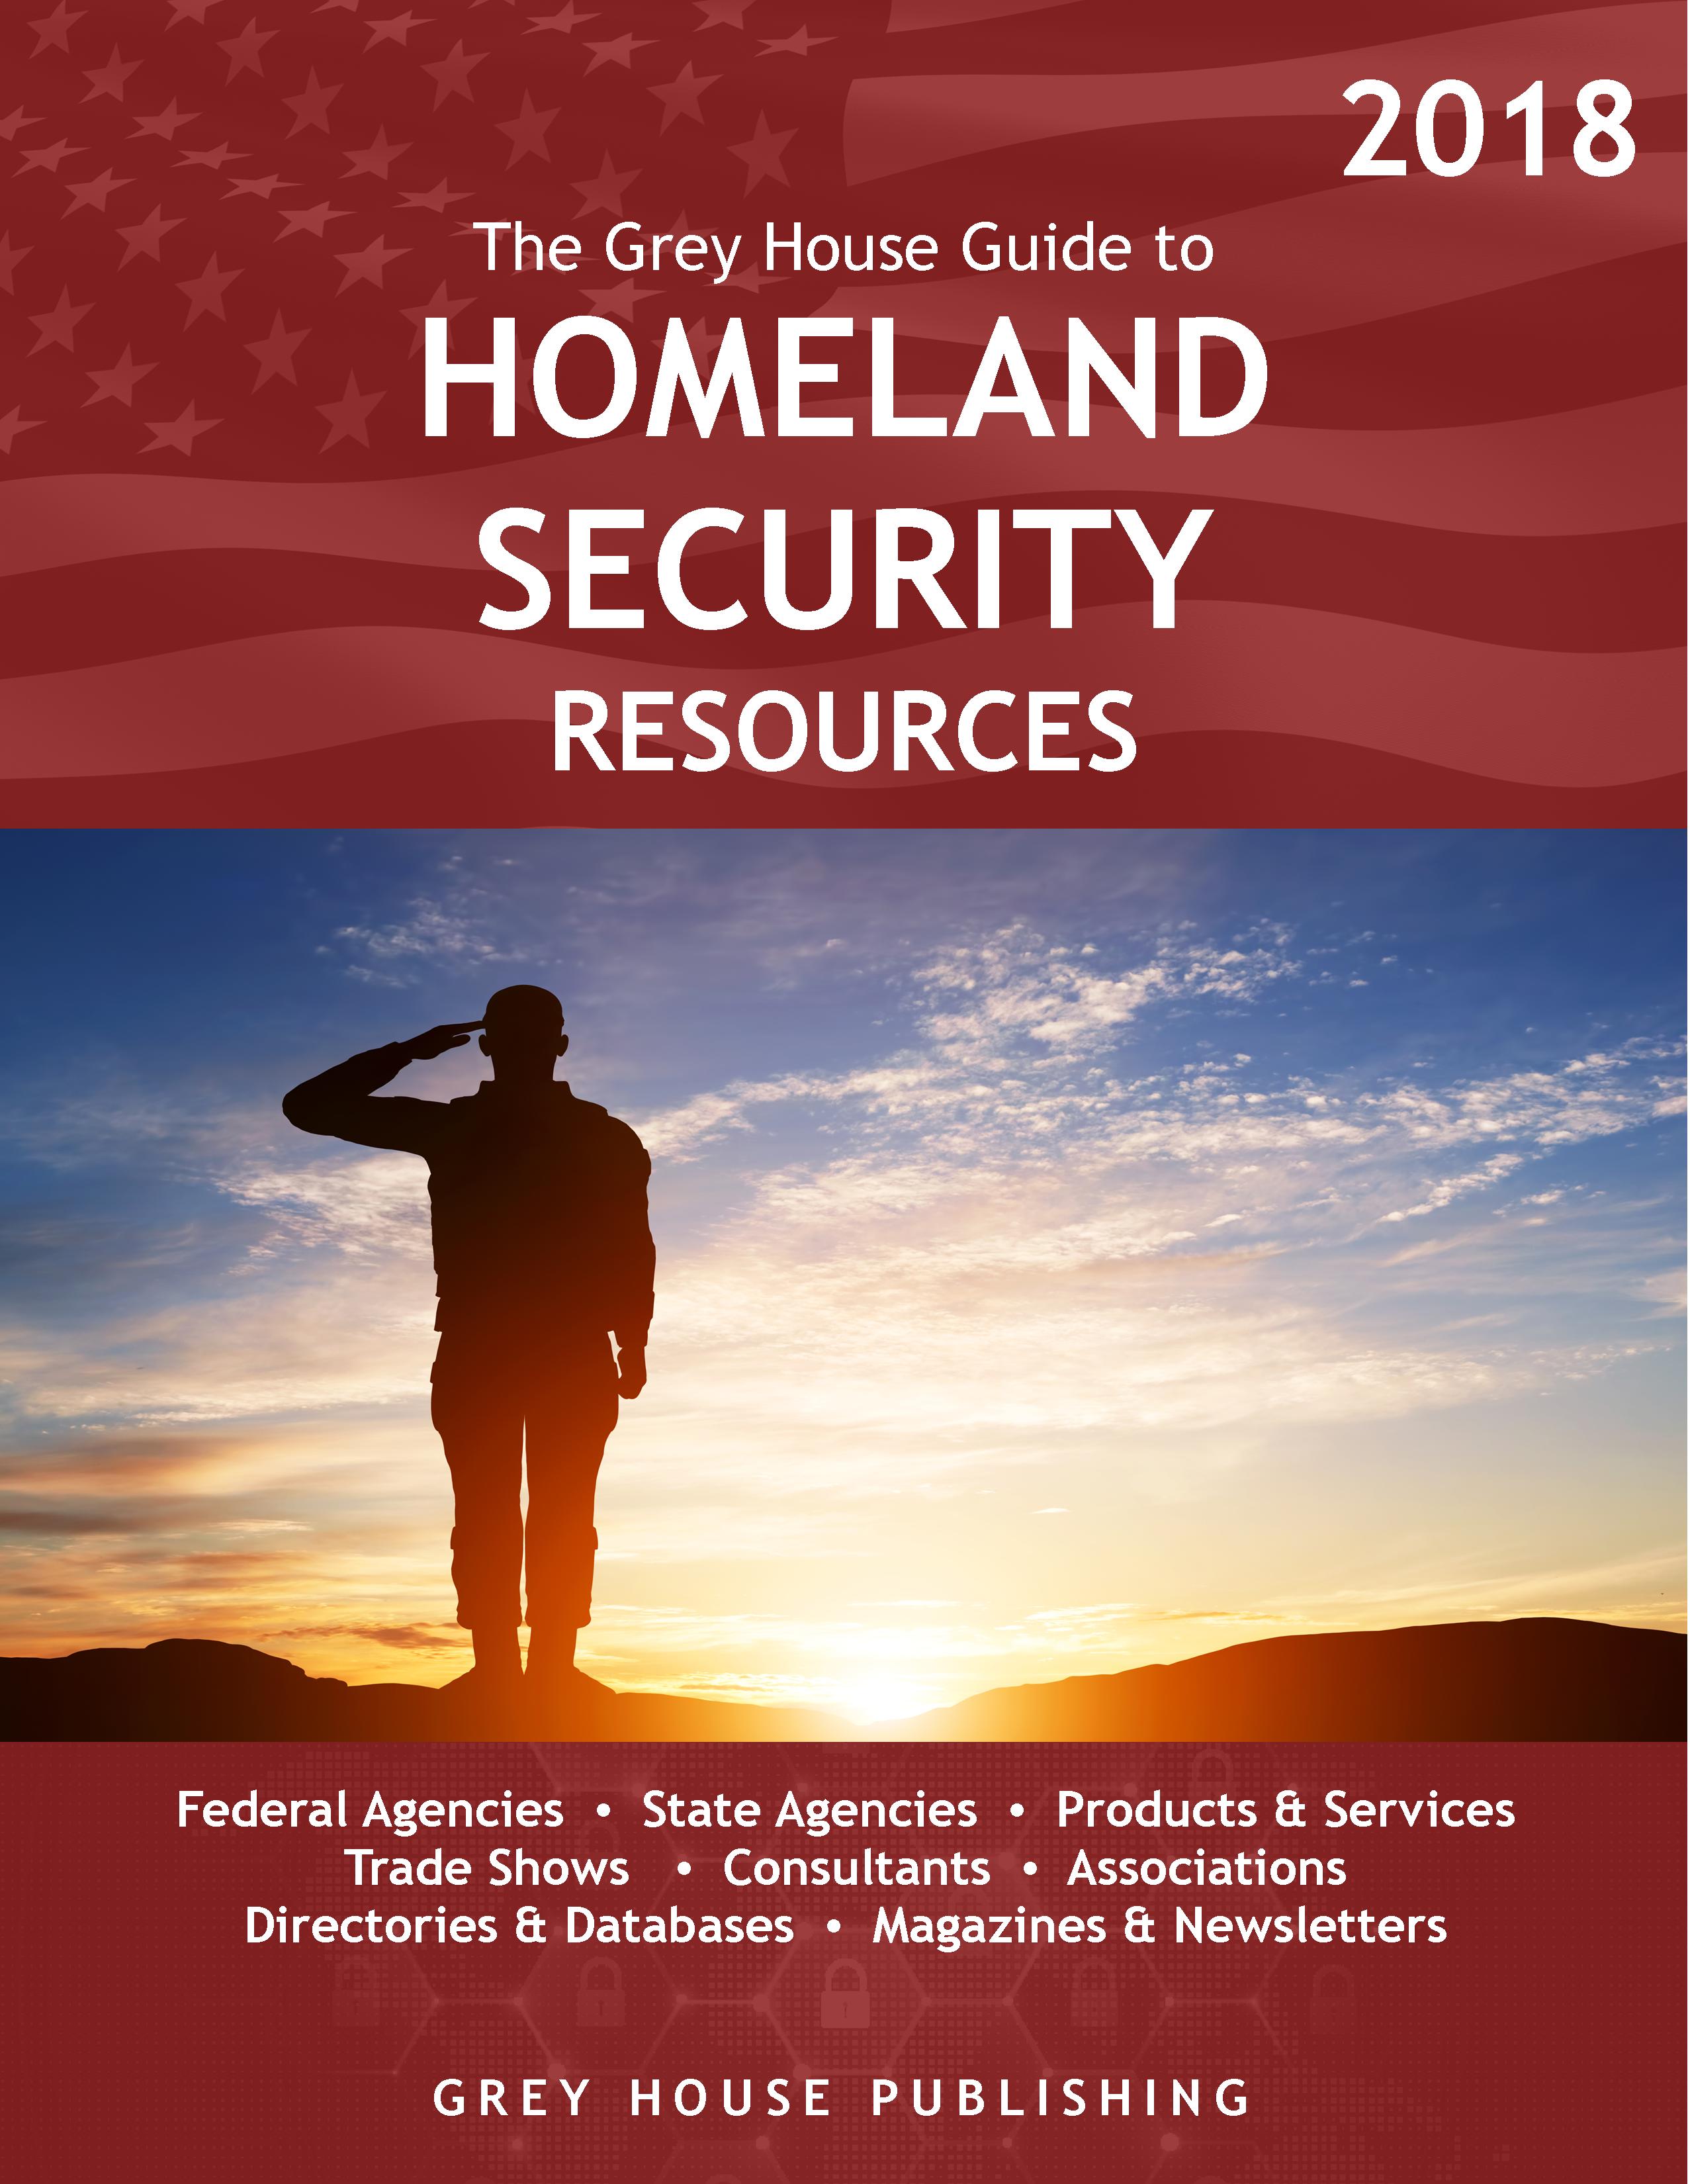 Guide to Homeland Security Resources